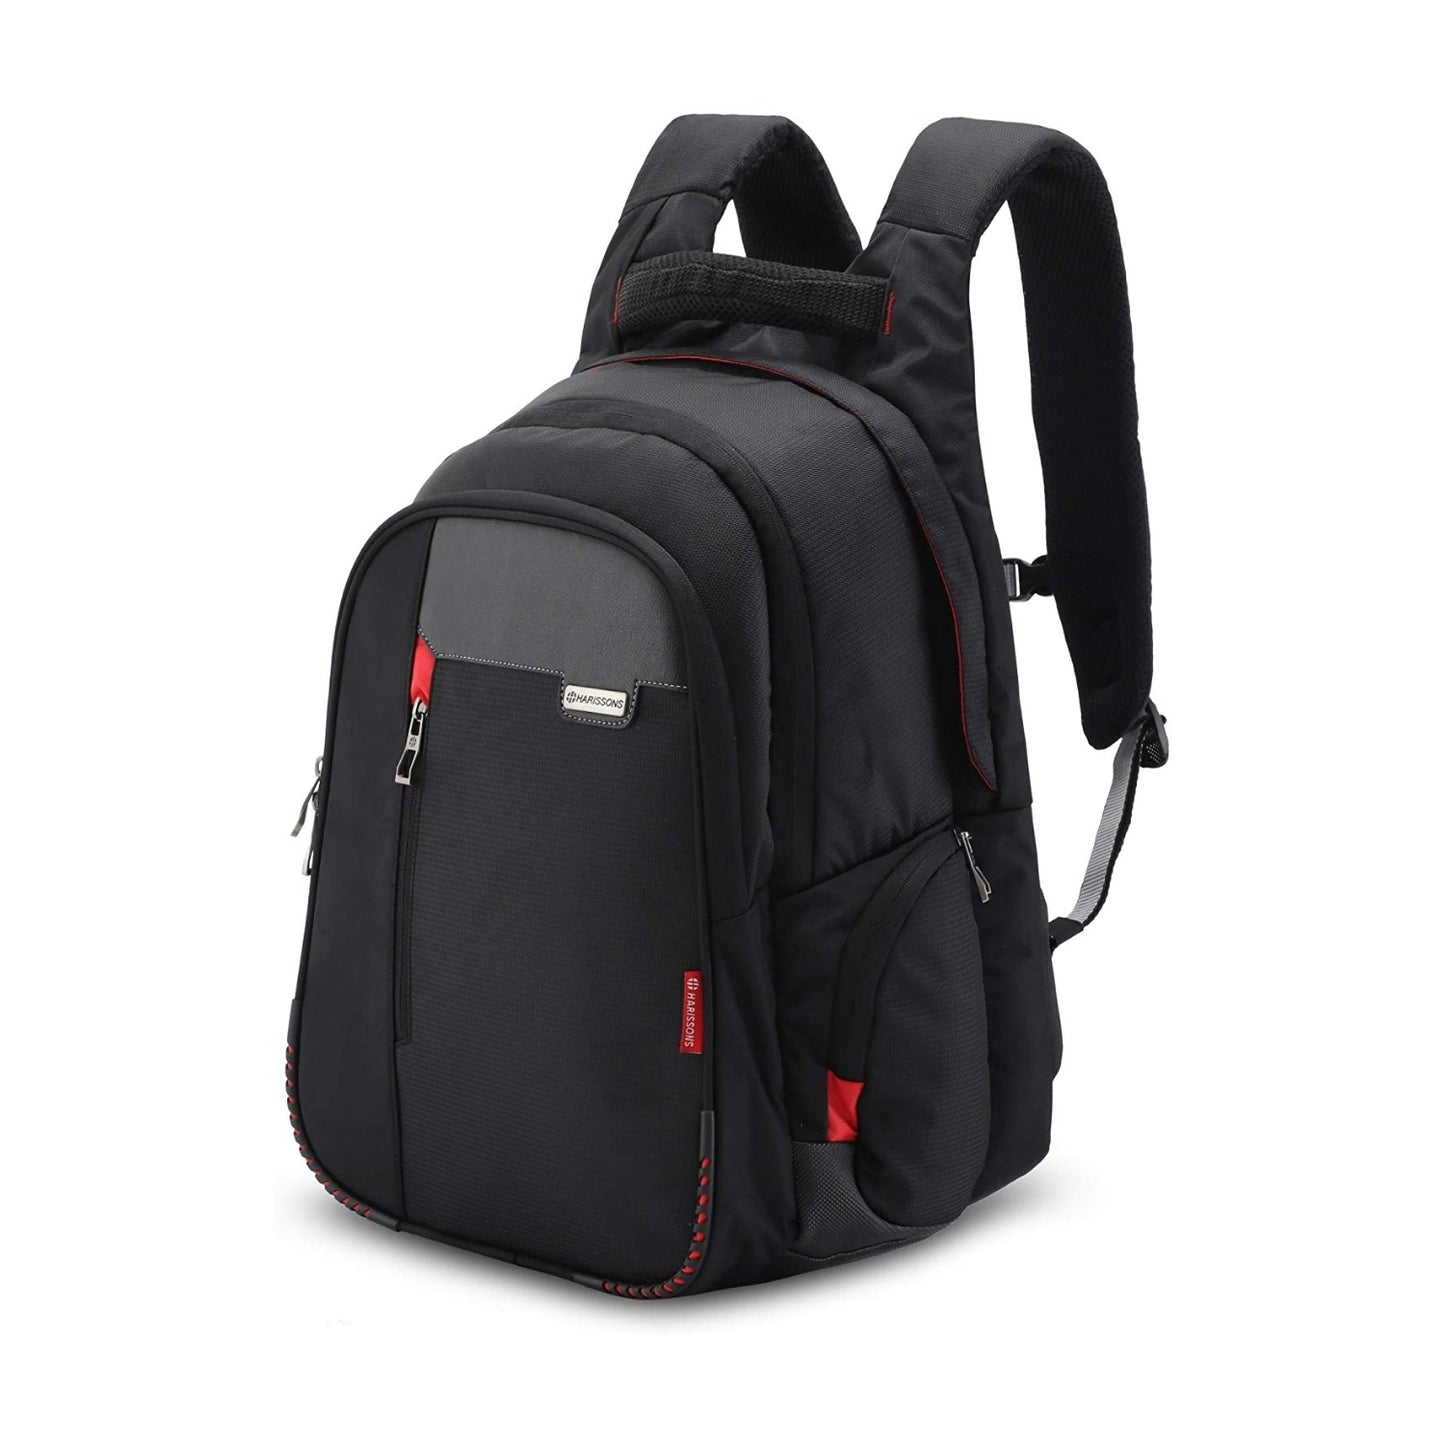 Harissons Sirius 45 Ltrs Executive Laptop Backpack (Up to 15.6 Inch) with USB Charging Connector & Built-in Waterproof Raincover